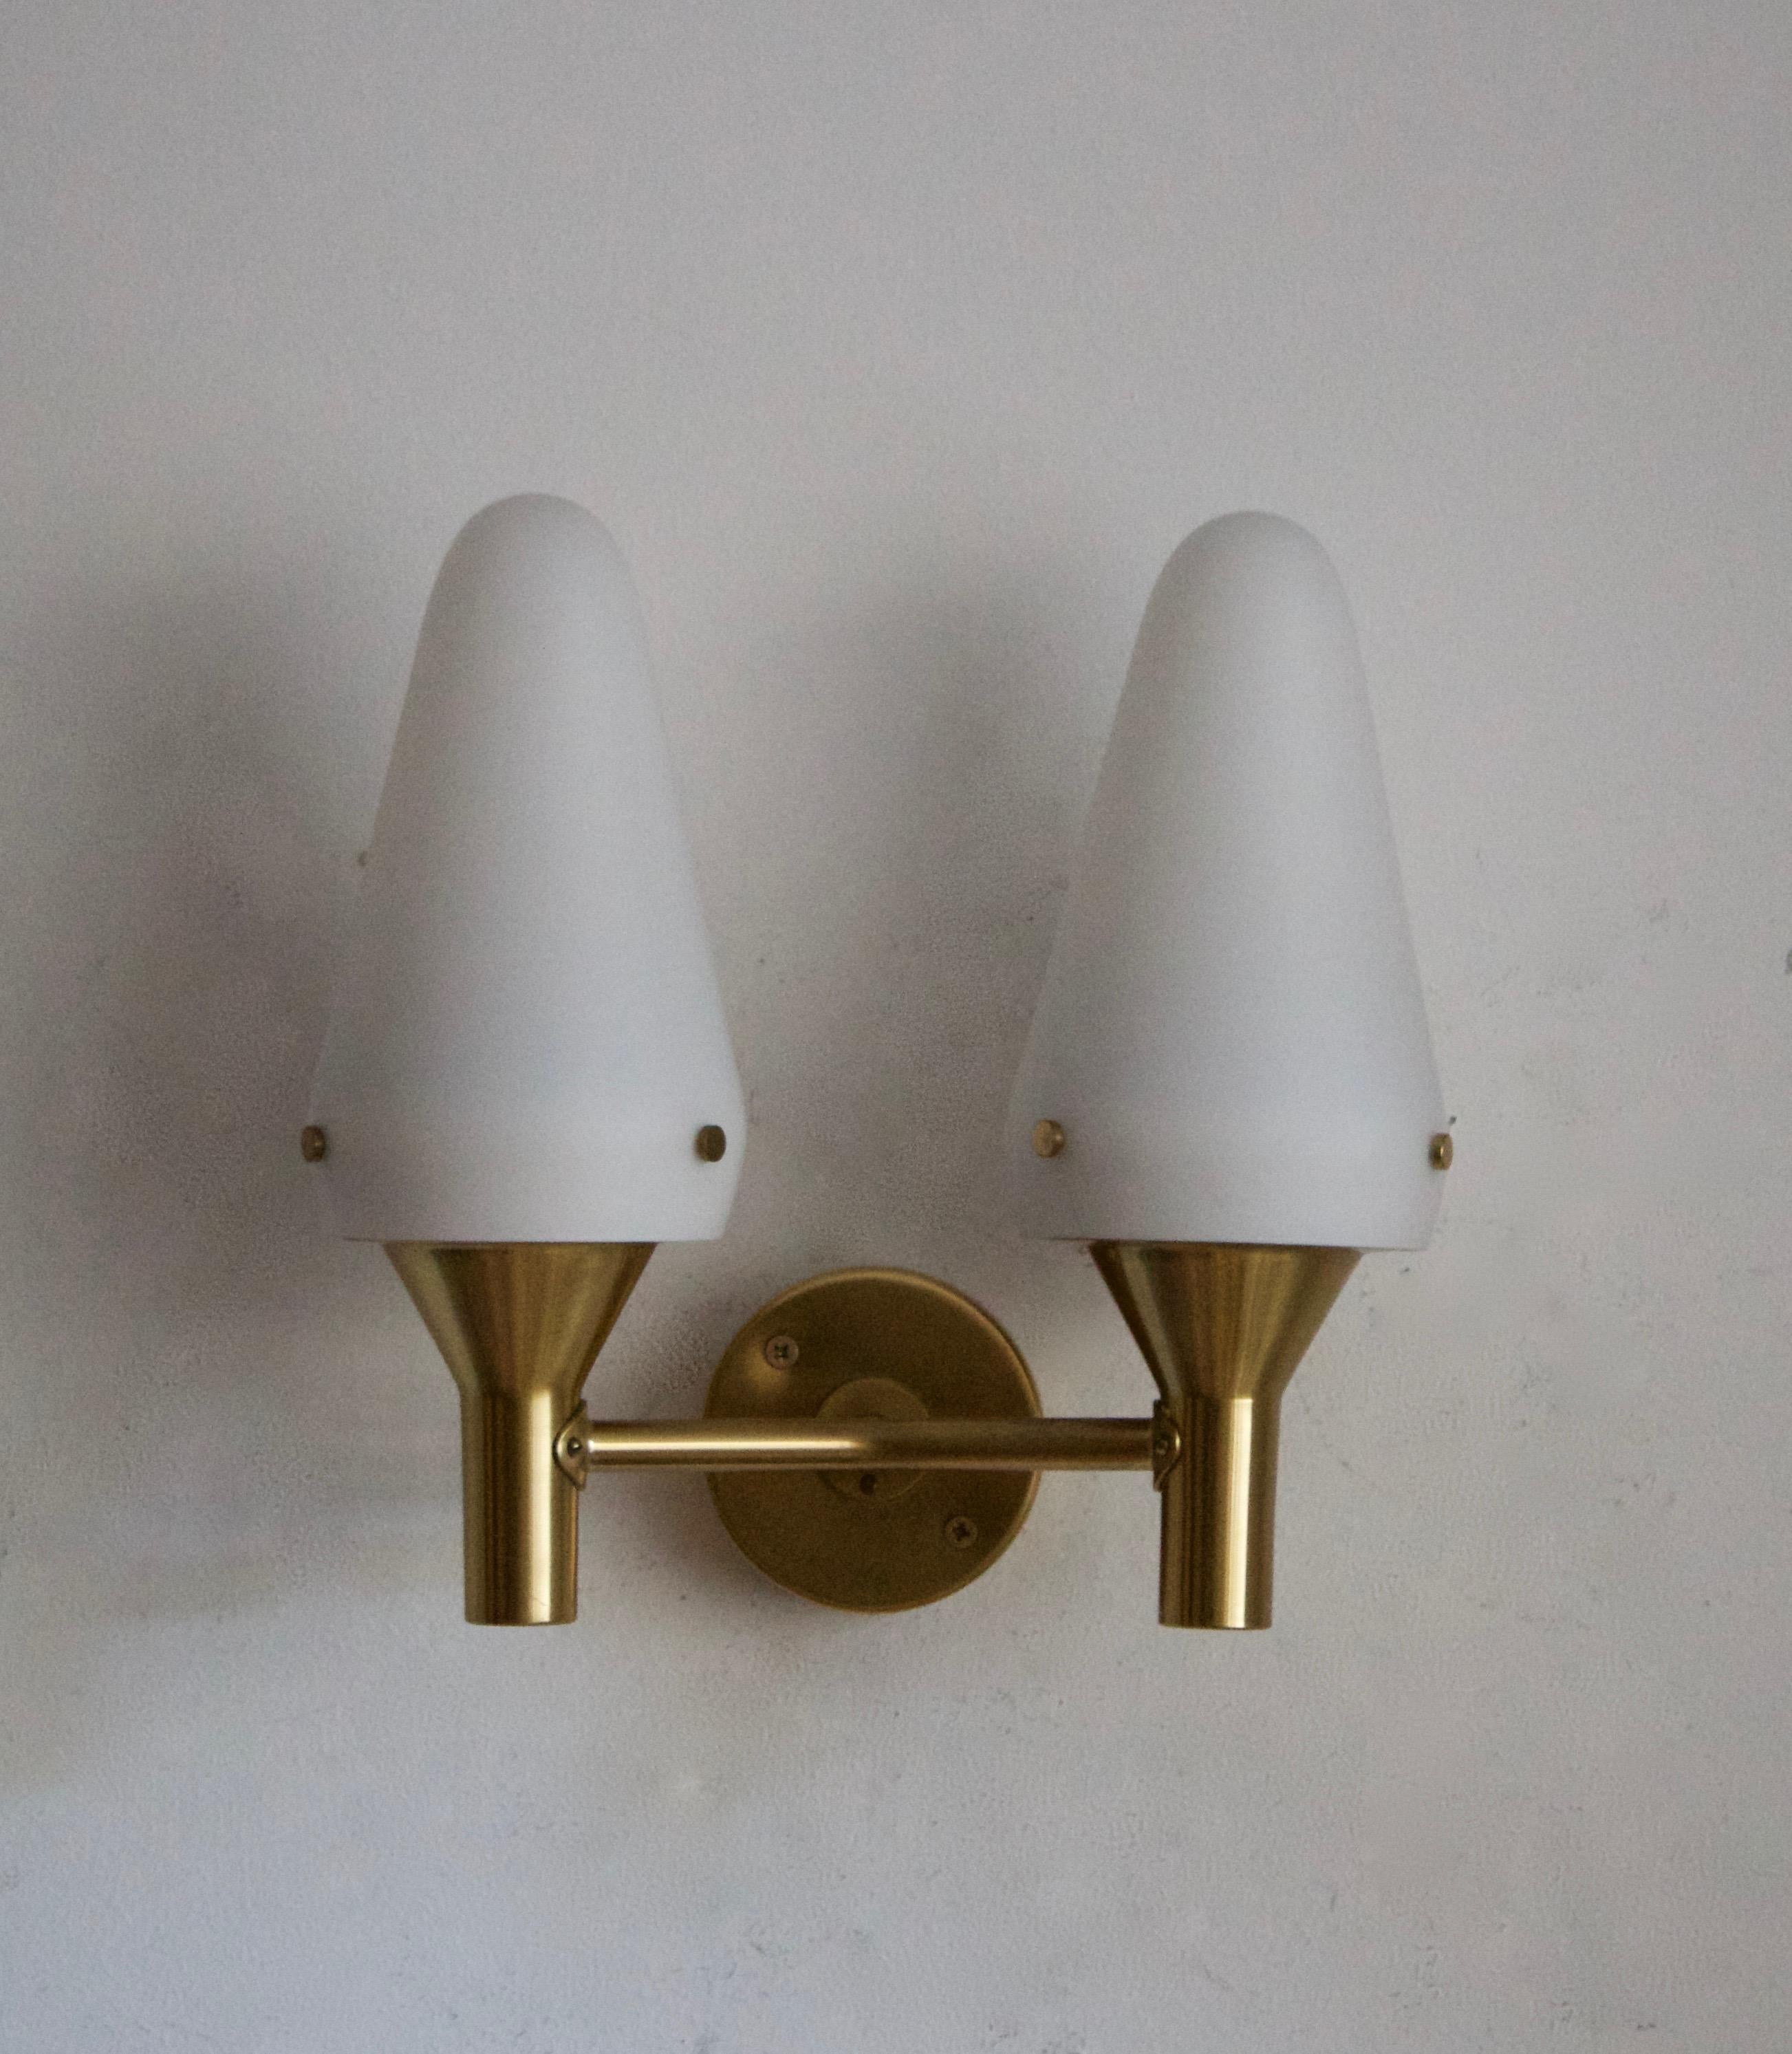 A two-armed wall light, designed by Hans-Agne Jakobsson for his own firm in Markaryd, Sweden. c. 1970s. Labeled.